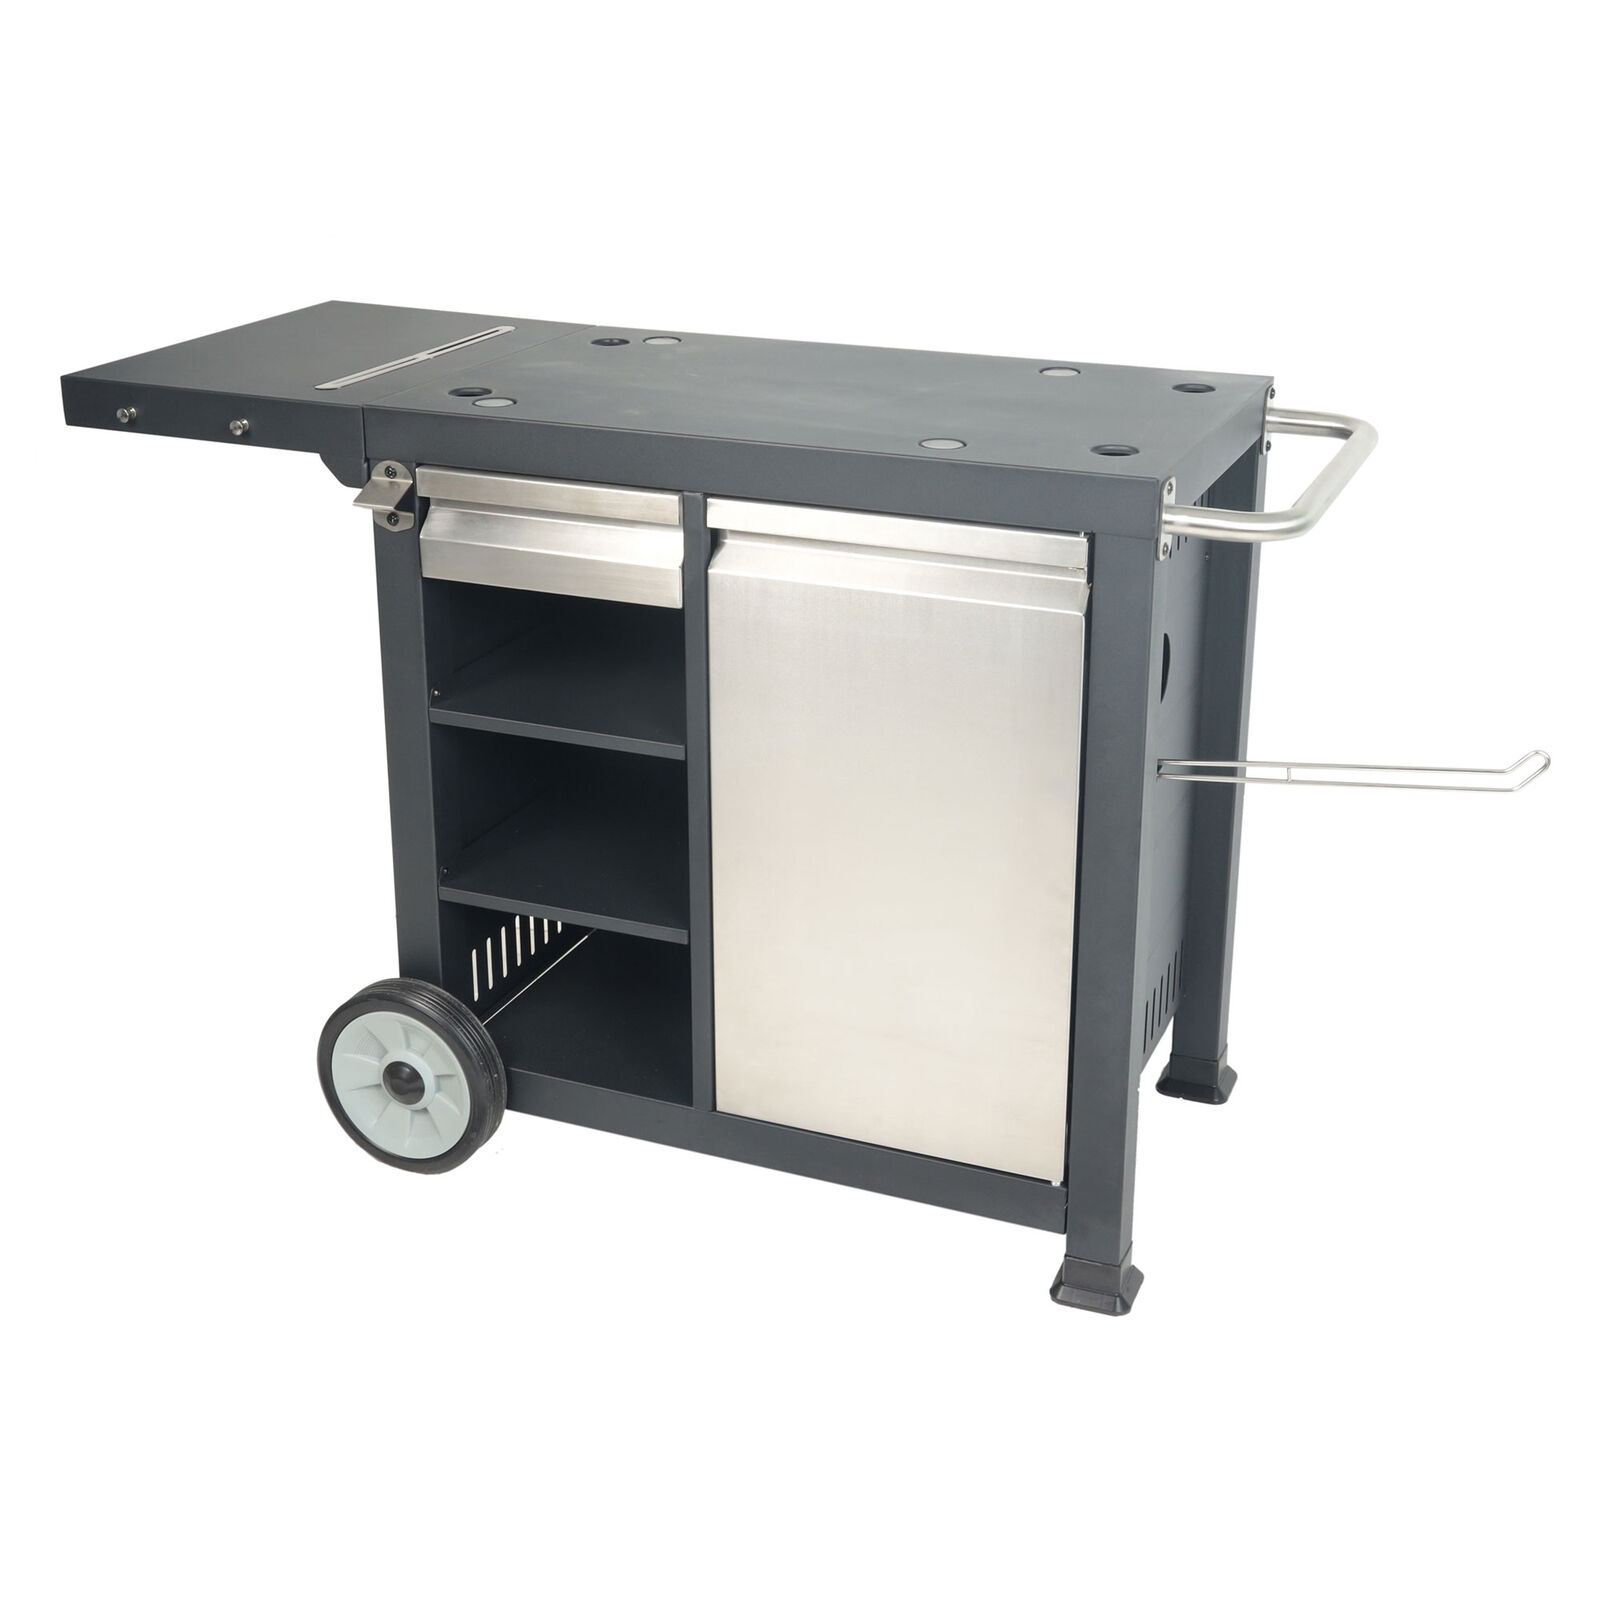 Razor Universal Rolling Prep Cart For Portable Outdoor Griddle And Grills, Black